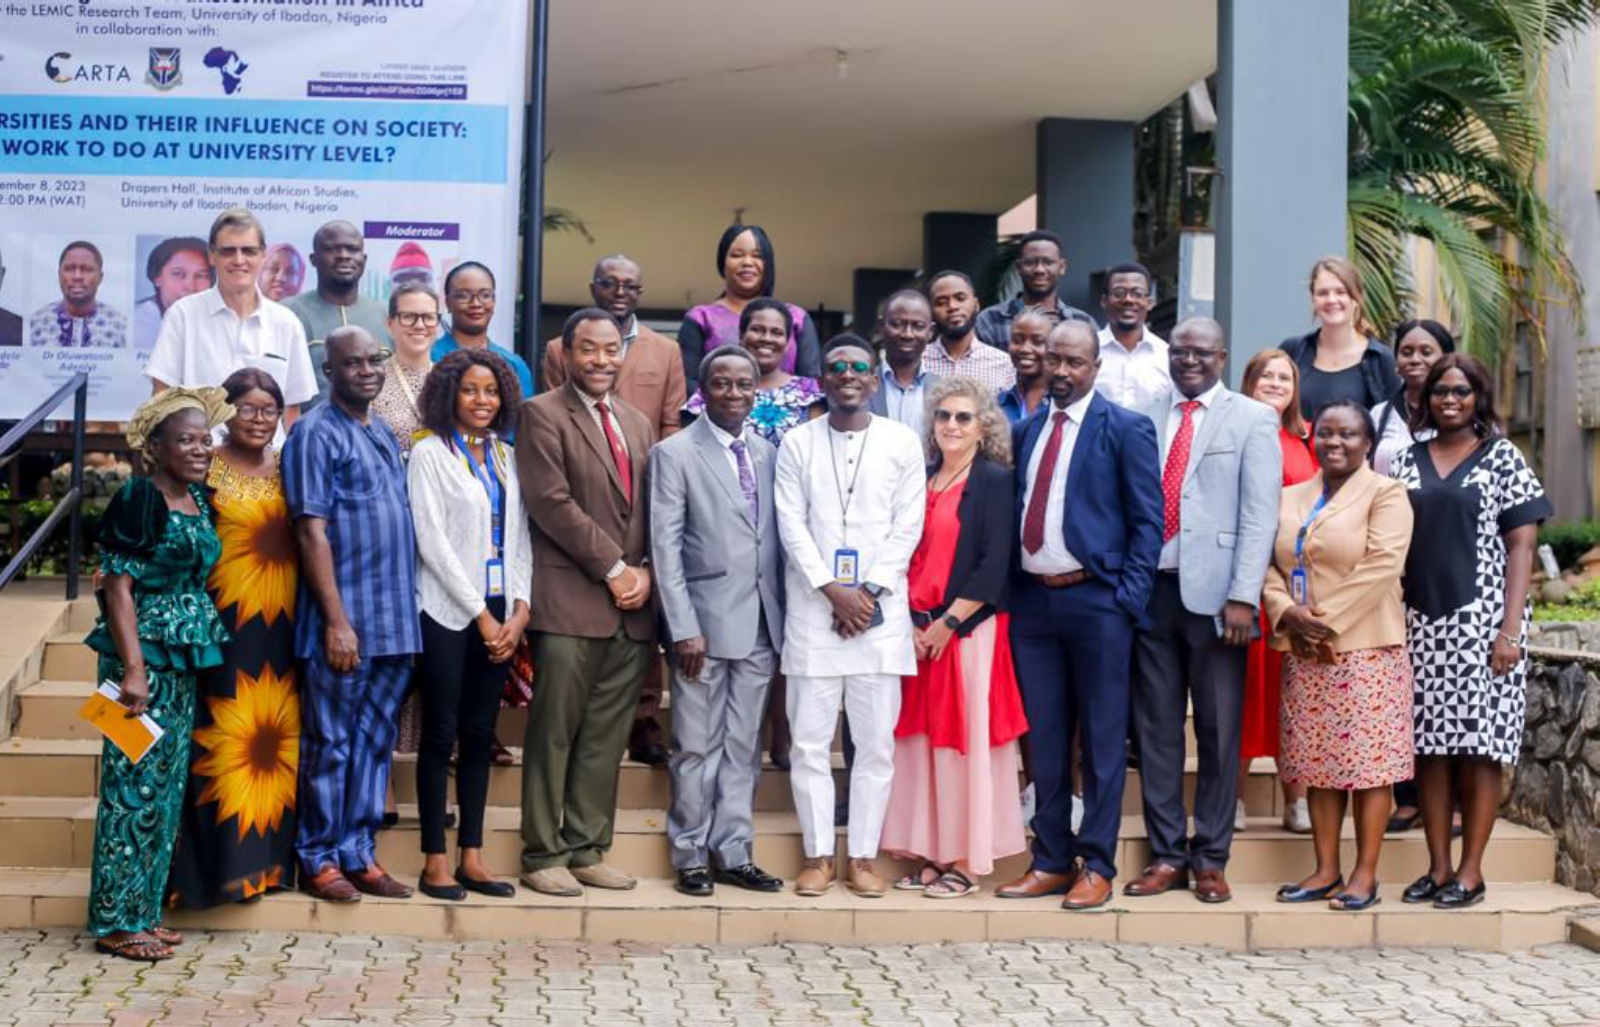 Patela Care Foundation participates as a vital stakeholder in the LIMEC Project Research Dissemination and Public Engagement Event; 7th September, 2023